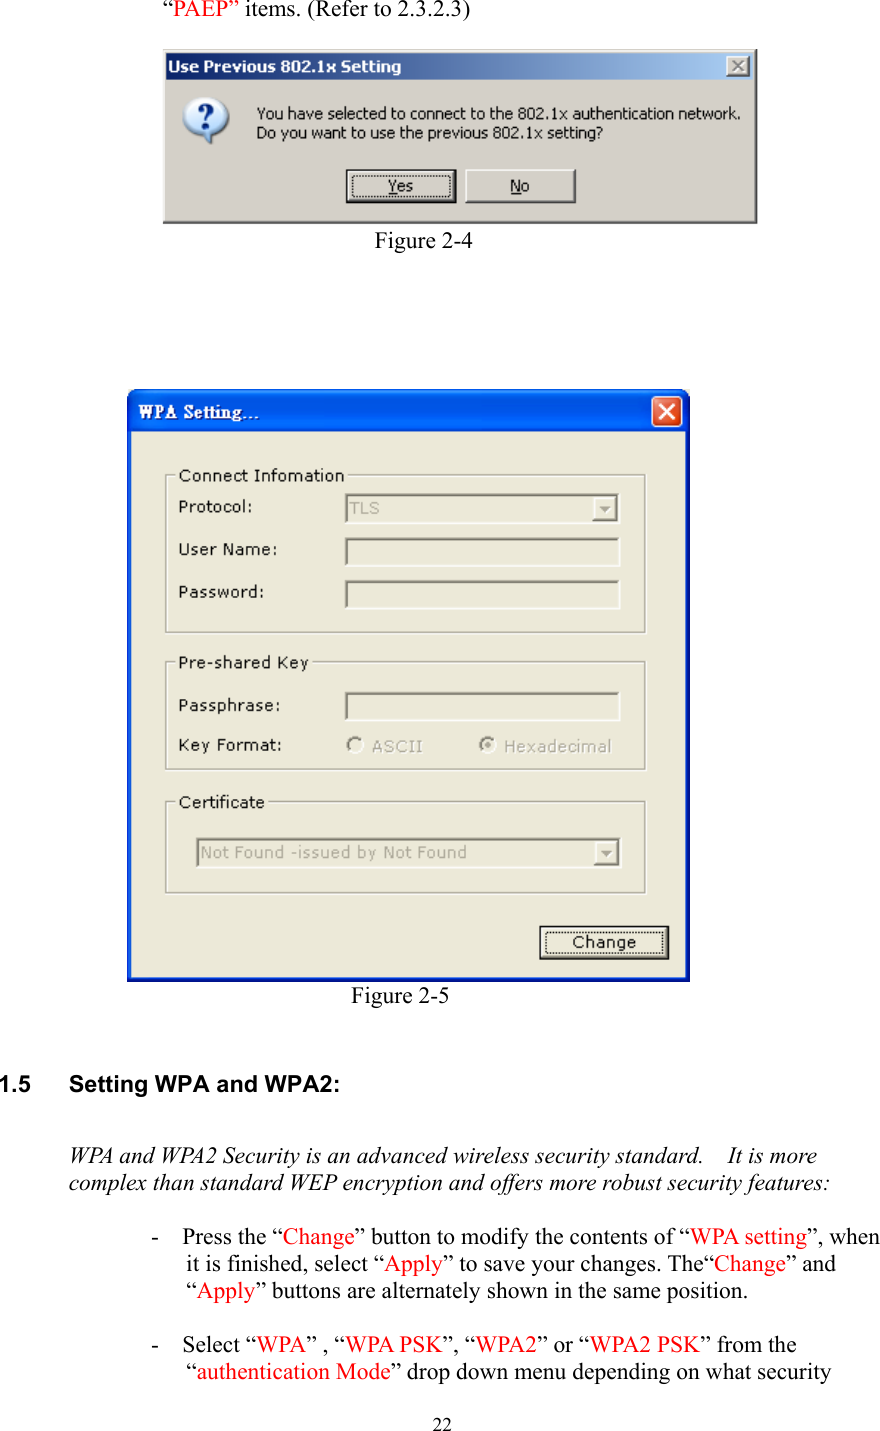  22 “PAEP” items. (Refer to 2.3.2.3)                                   Figure 2-4                       Figure 2-5    1.5  Setting WPA and WPA2:  WPA and WPA2 Security is an advanced wireless security standard.    It is more complex than standard WEP encryption and offers more robust security features:    -  Press the “Change” button to modify the contents of “WPA setting”, when it is finished, select “Apply” to save your changes. The“Change” and “Apply” buttons are alternately shown in the same position.    -  Select “WPA” , “WPA PSK”, “WPA2” or “WPA2 PSK” from the “authentication Mode” drop down menu depending on what security 